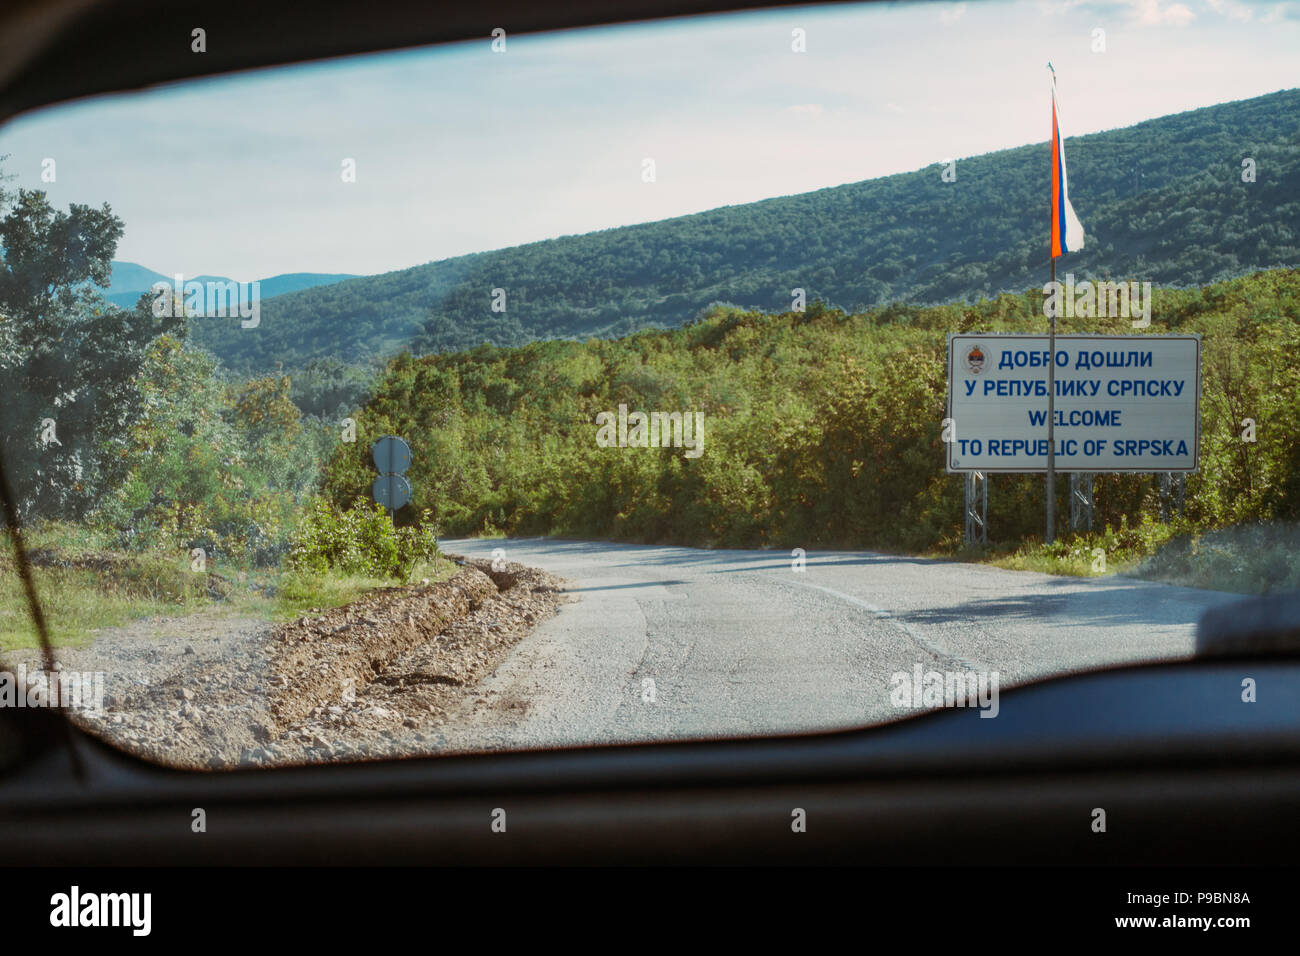 The view out the rear window of a car crossing the border leaving Republic of Srpska, Bosnia and Herzegovina, and entering Montenegro Stock Photo